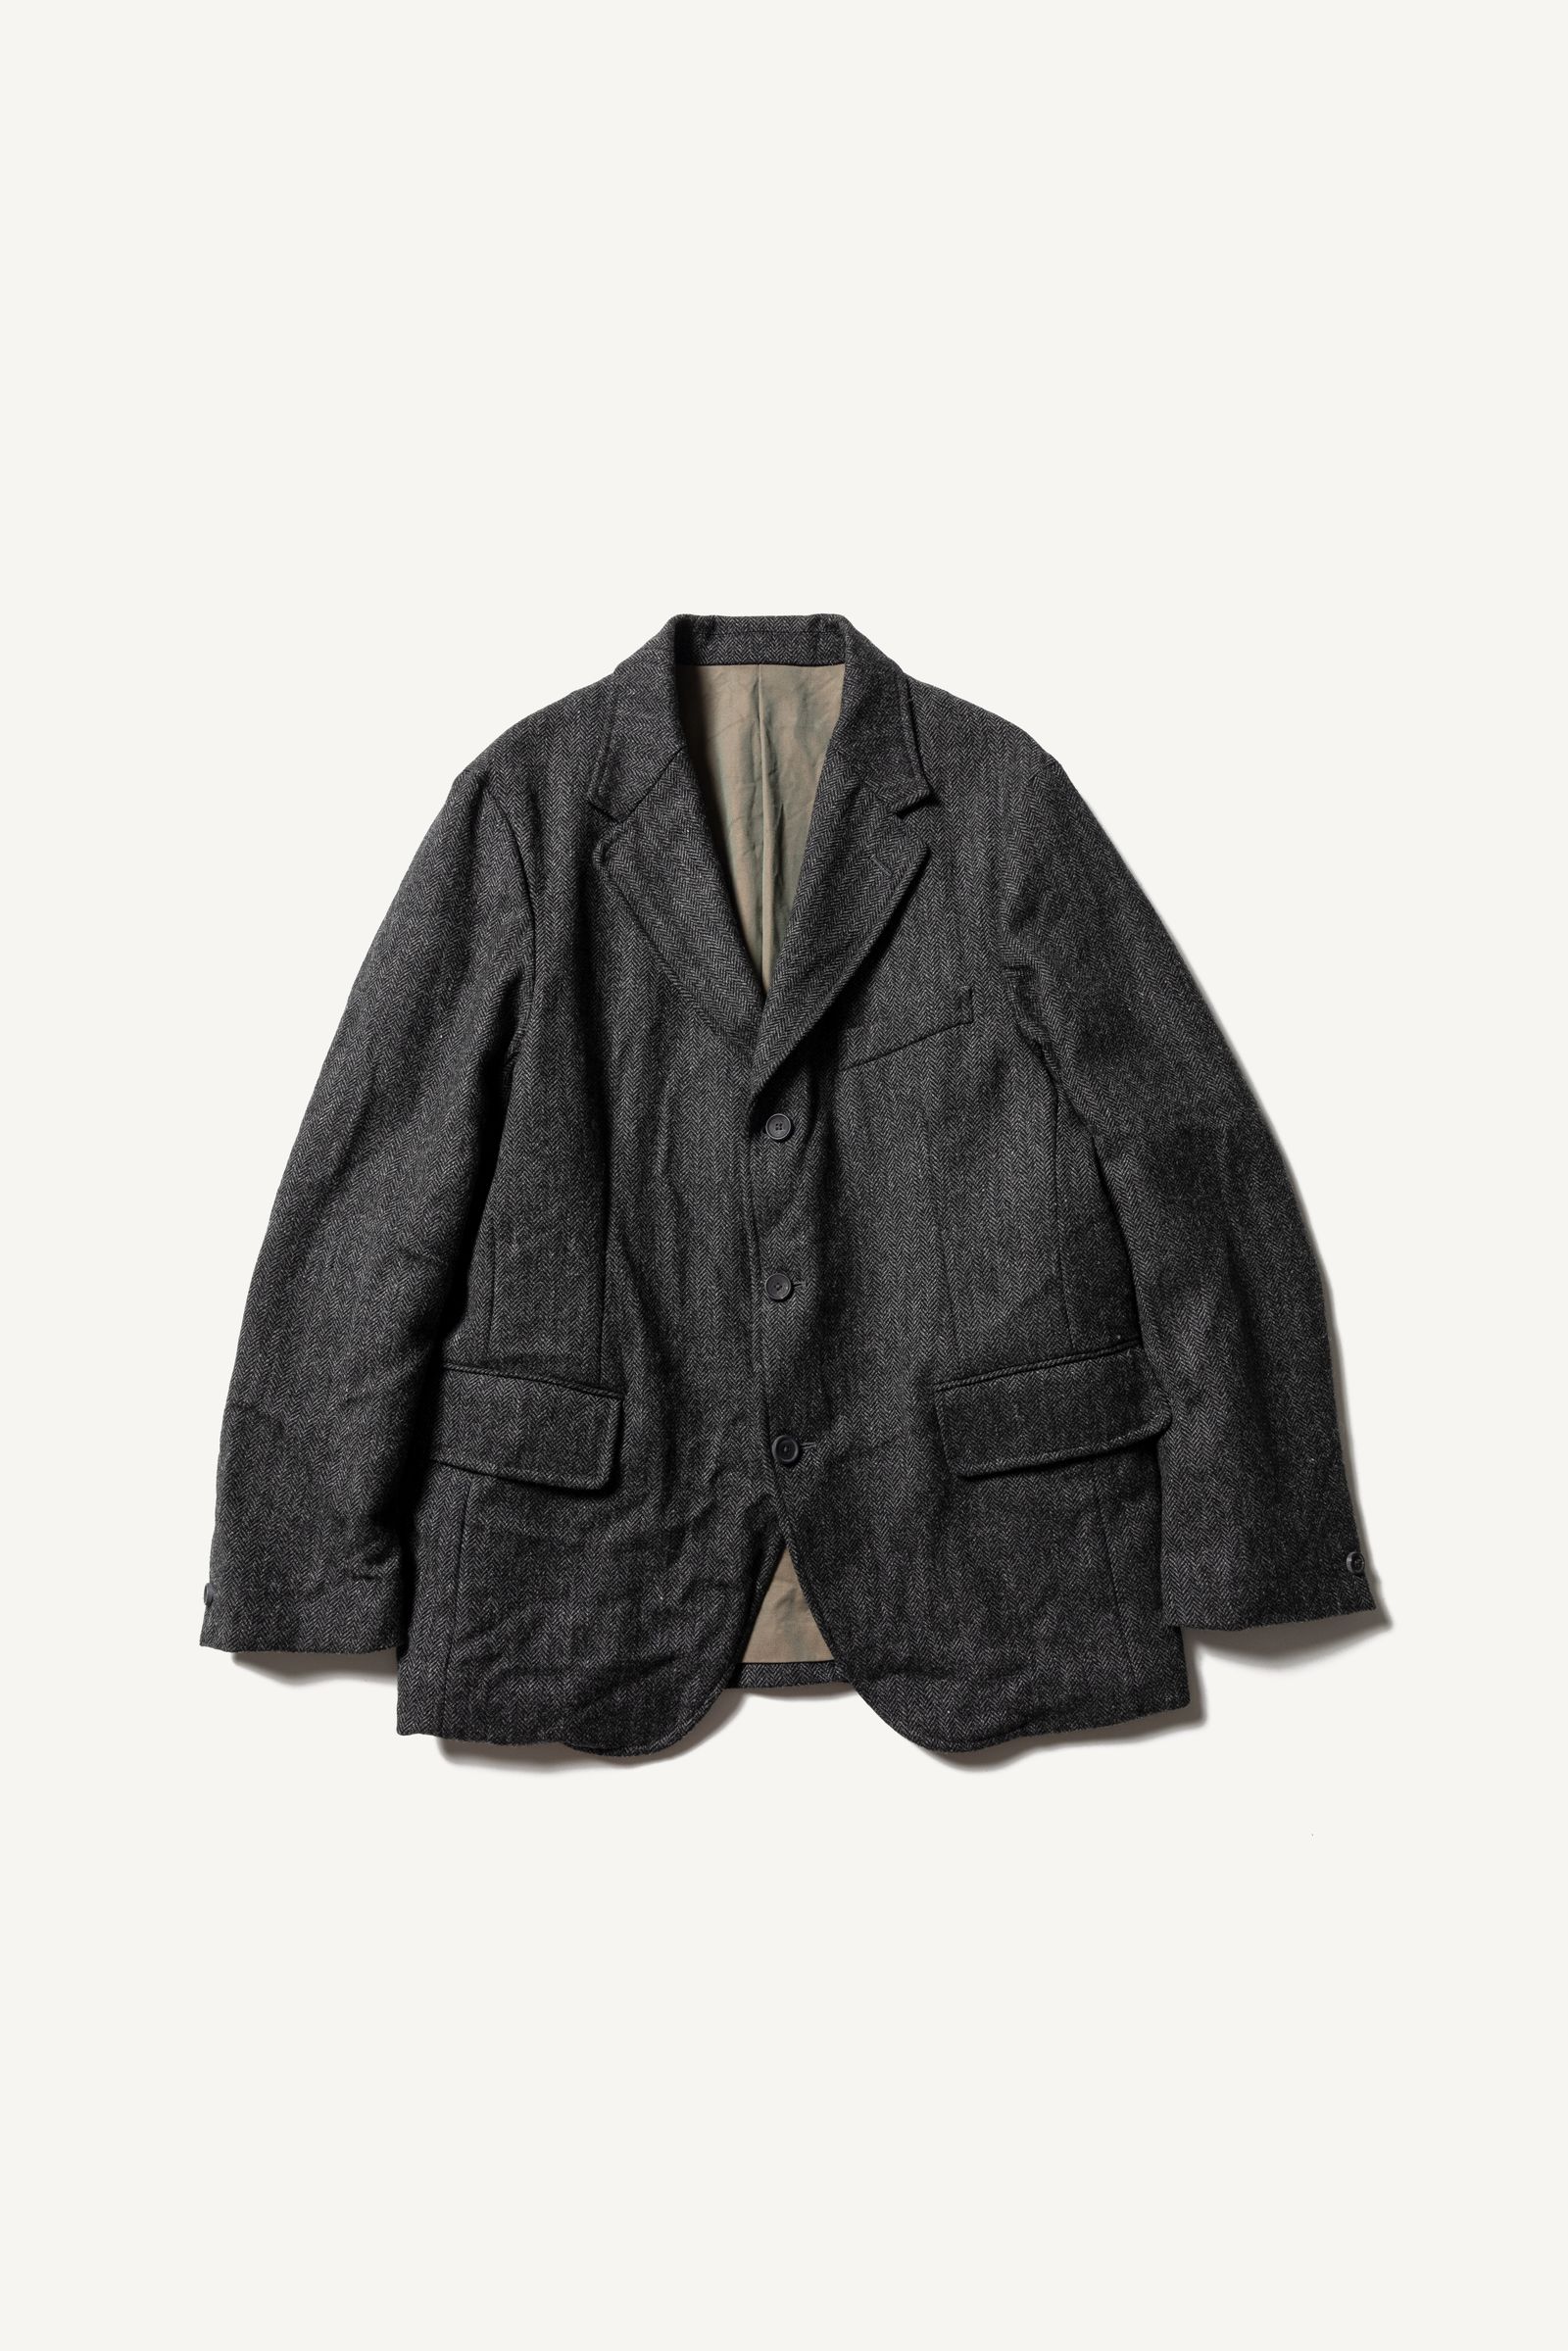 A.PRESSE - アプレッセ22FW Tweed Tailored Jacket(22AAP-01-16H)CHARCOAL | mark